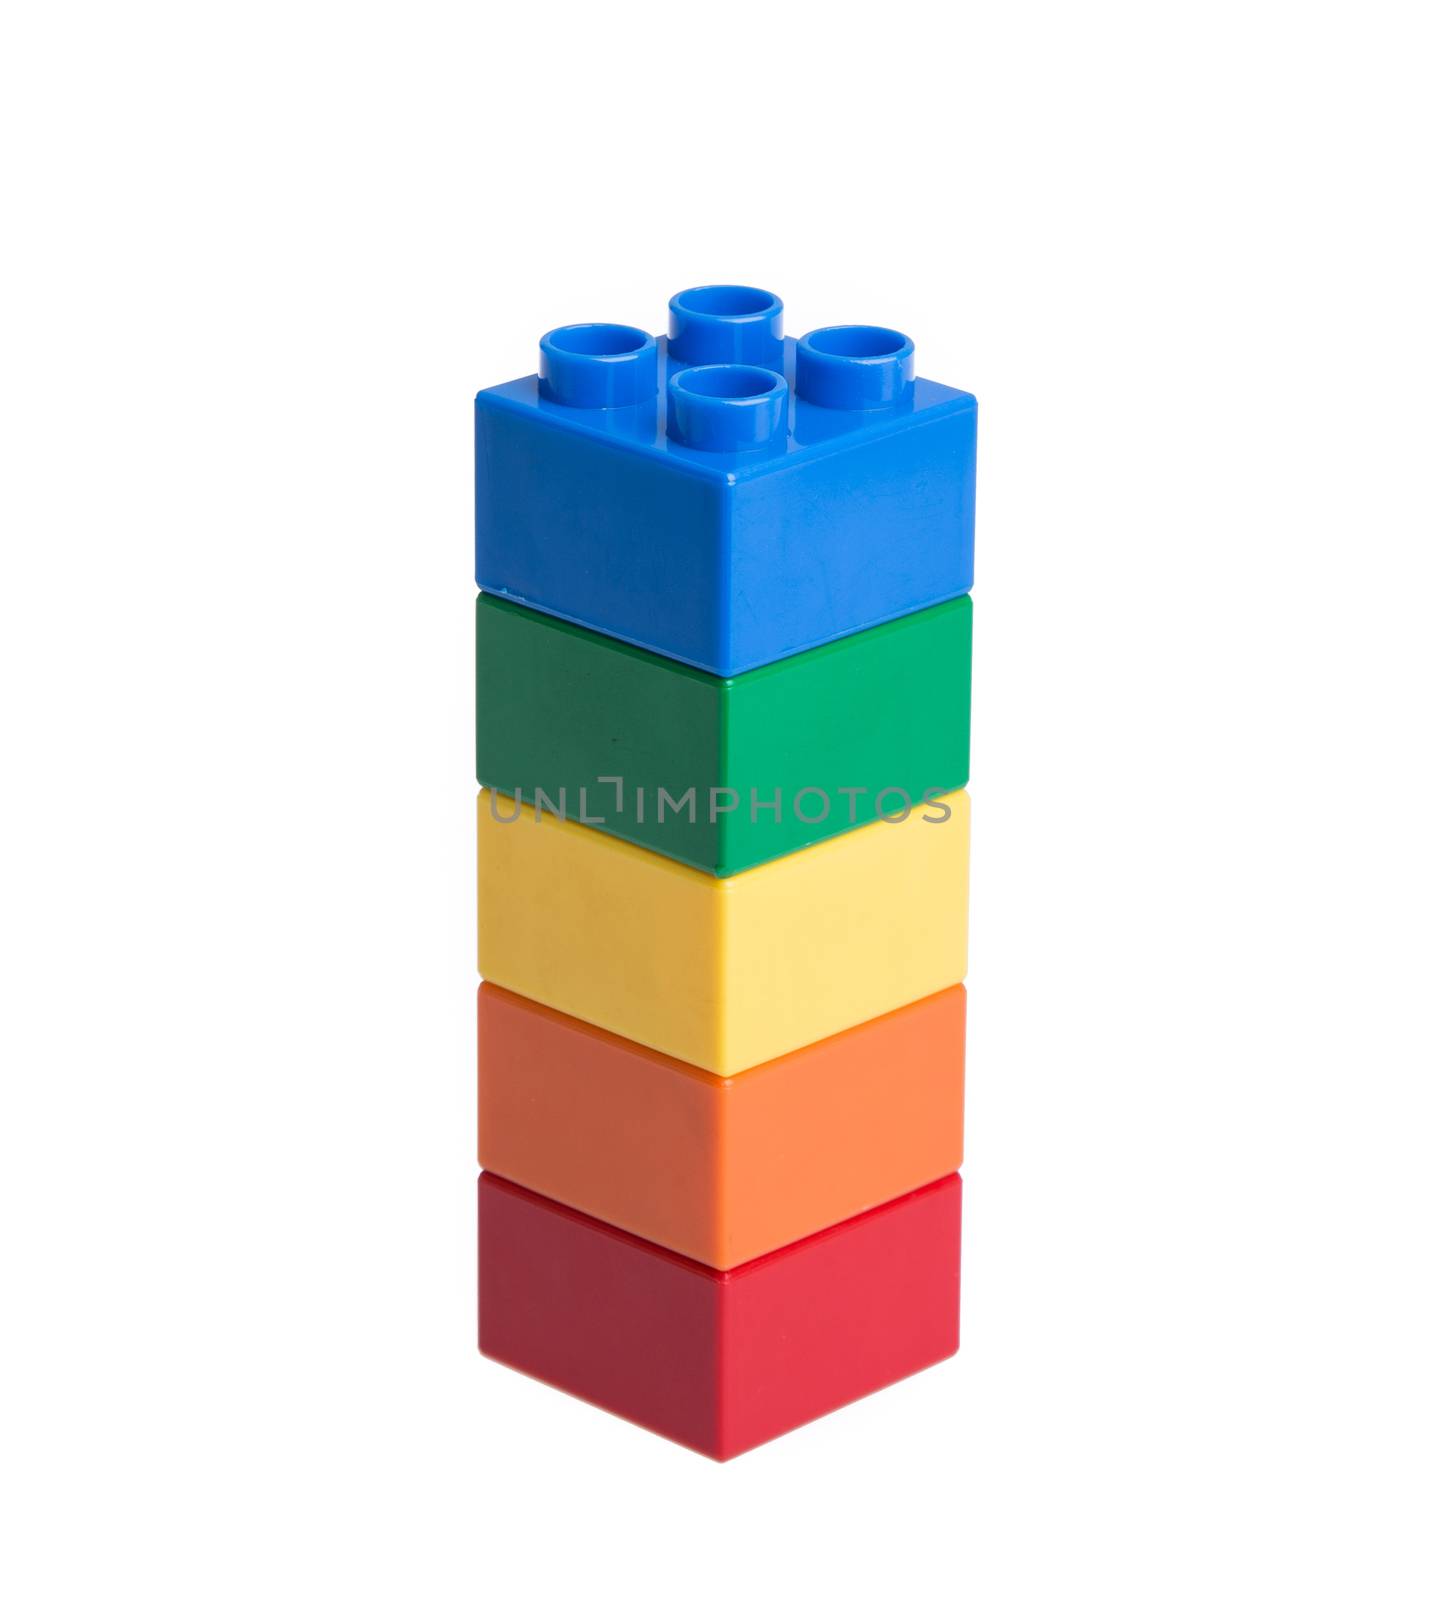 Plastic building blocks by tehcheesiong